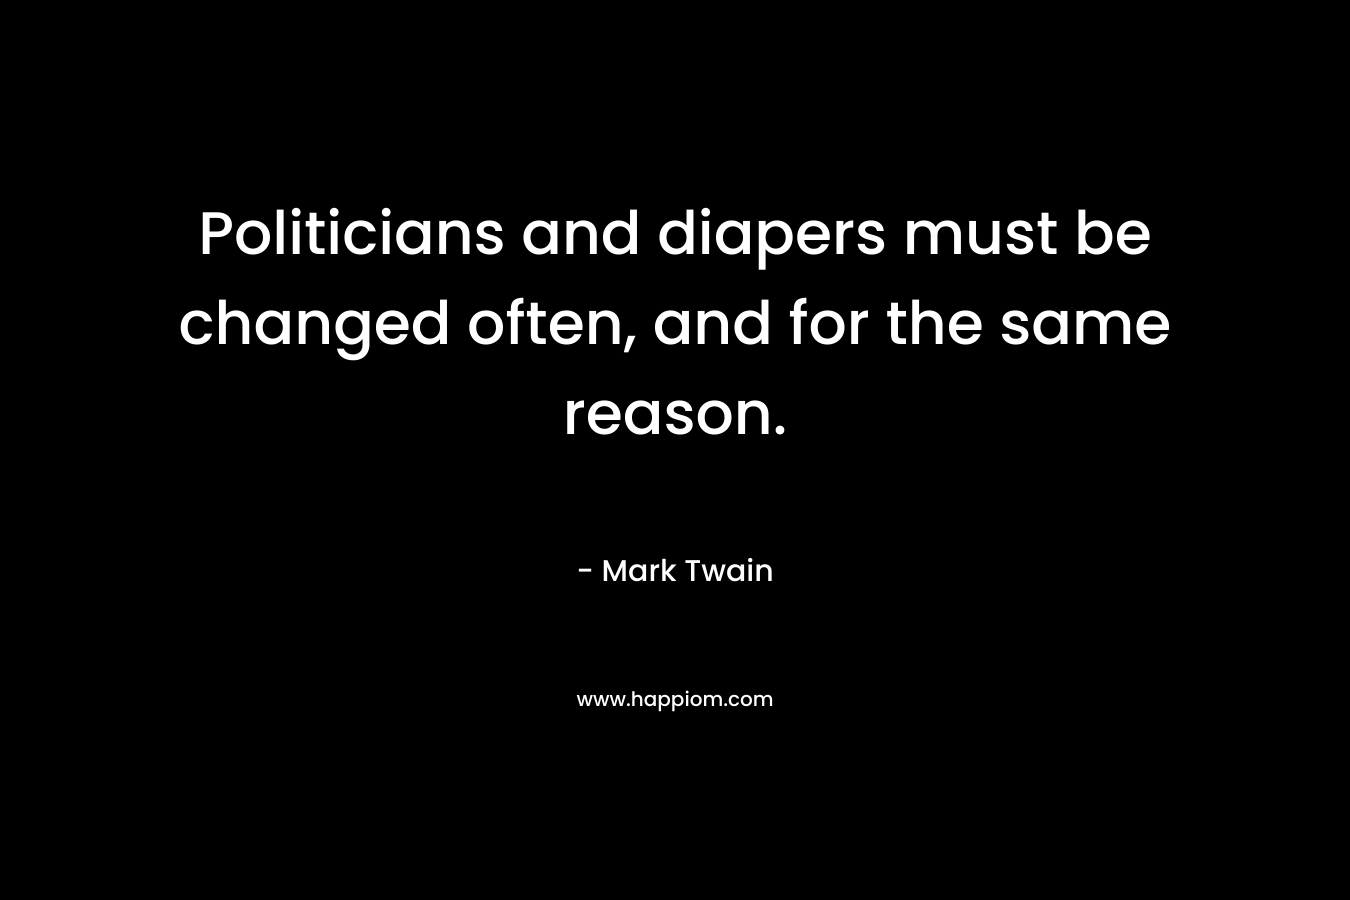 Politicians and diapers must be changed often, and for the same reason. – Mark Twain